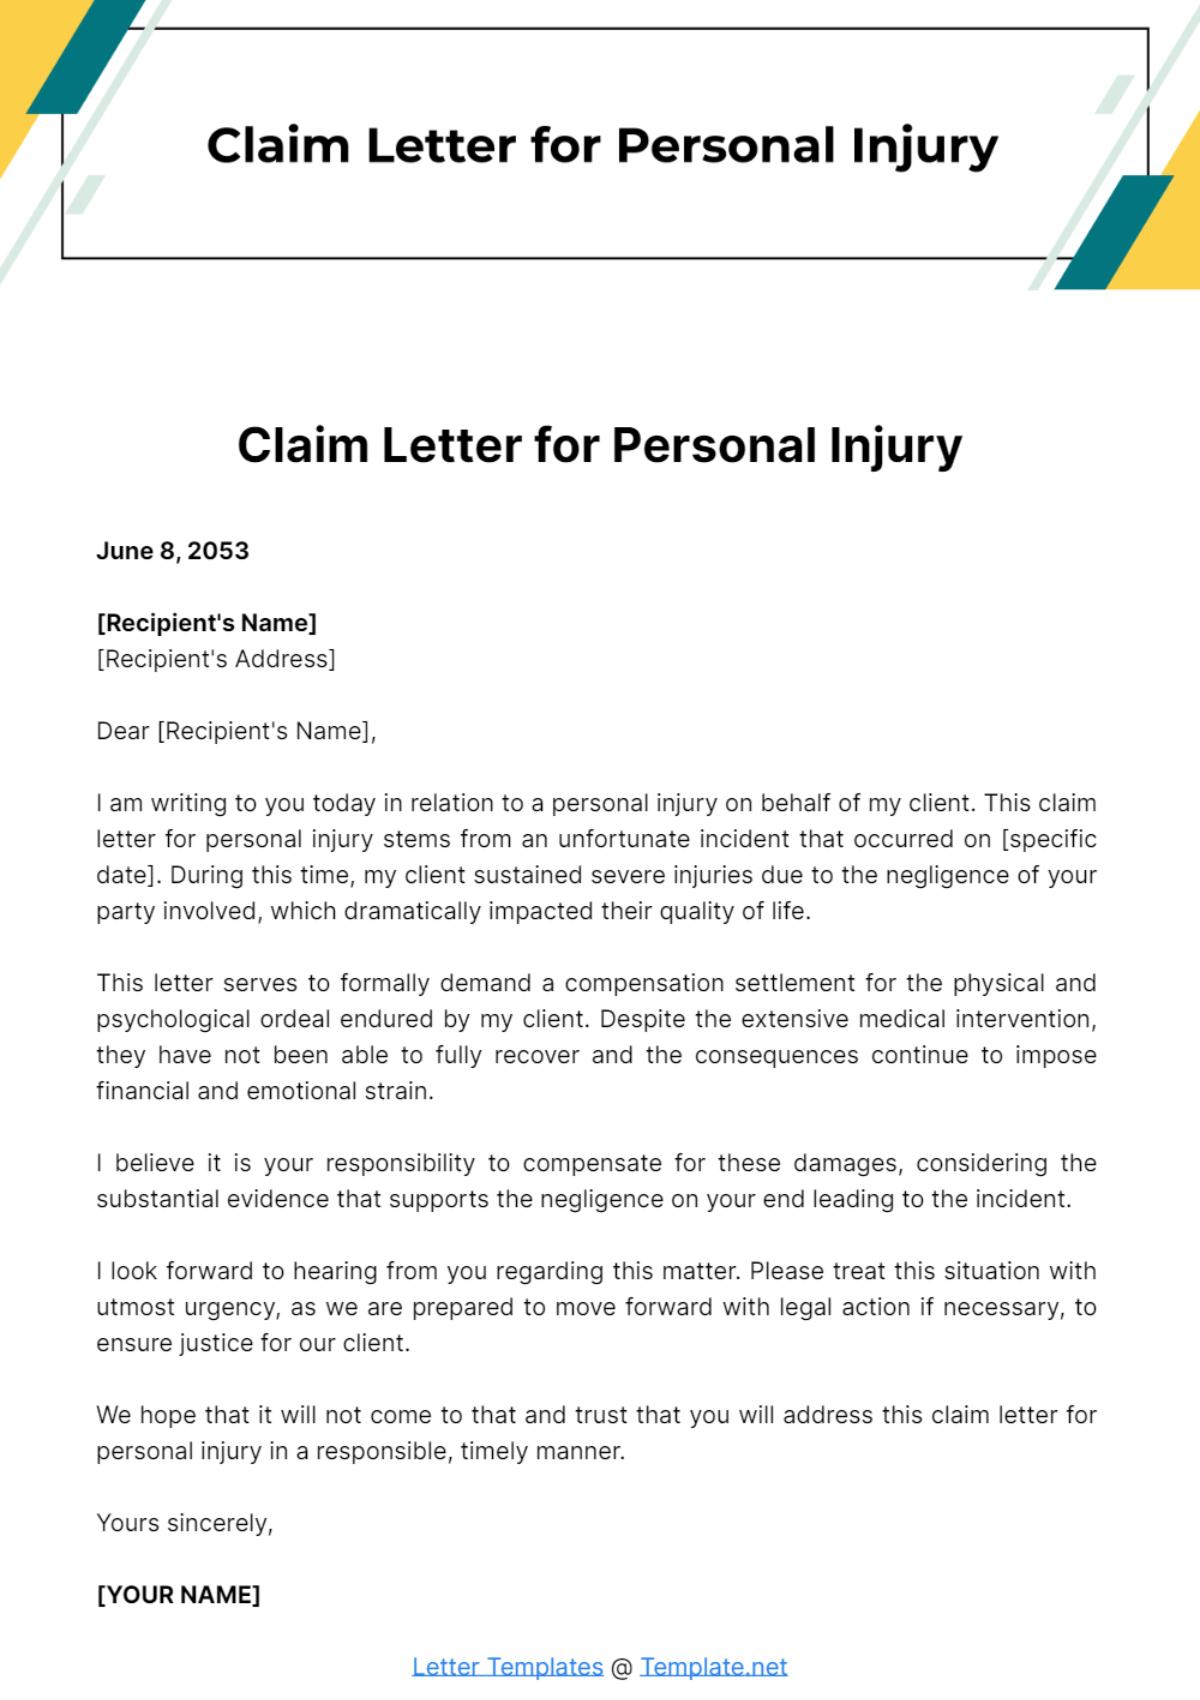 Claim Letter for Personal Injury Template